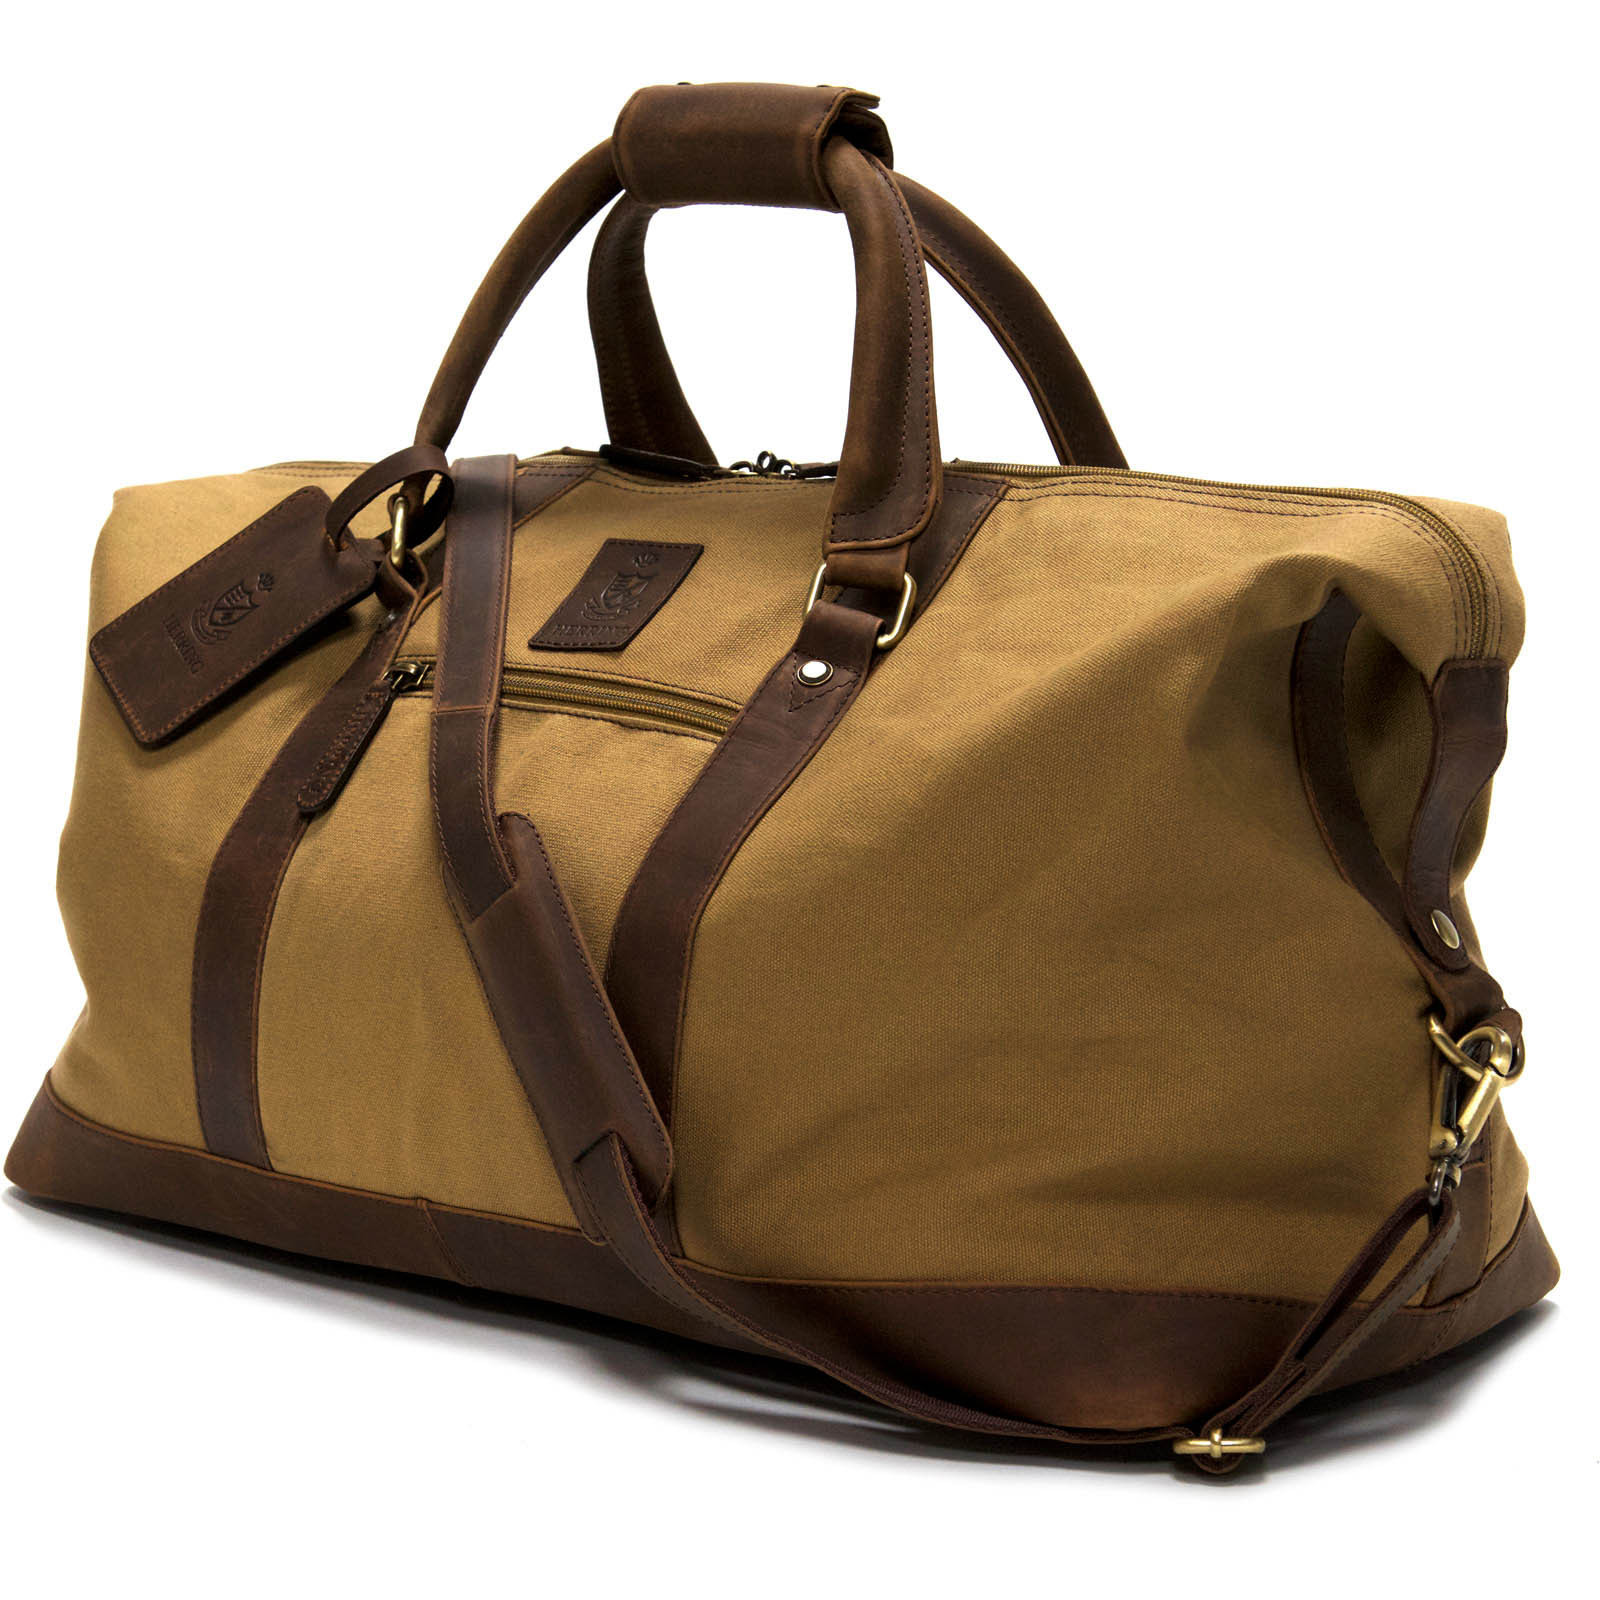 Herring shoes | Herring Luggage | Montgomery Holdall in Brown and Khaki ...